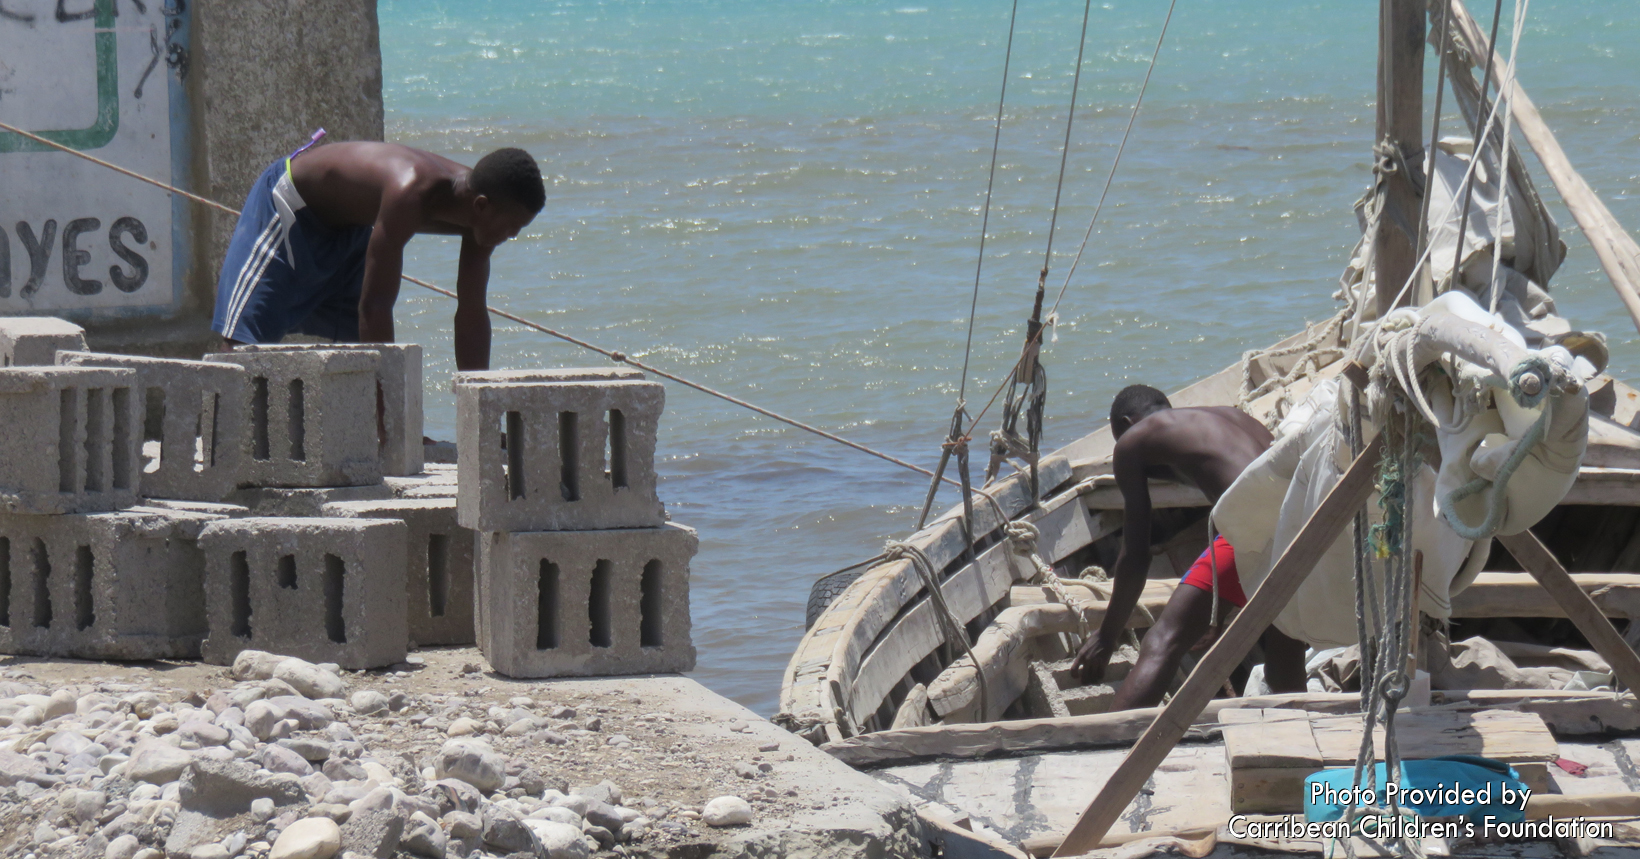 The process of building on Île-à-Vache is VERY TIME CONSUMING, as all building materials must be transported from the mainland on small boats to the island. Rough seas can limit the days that materials can be sent to Île-à-Vache.